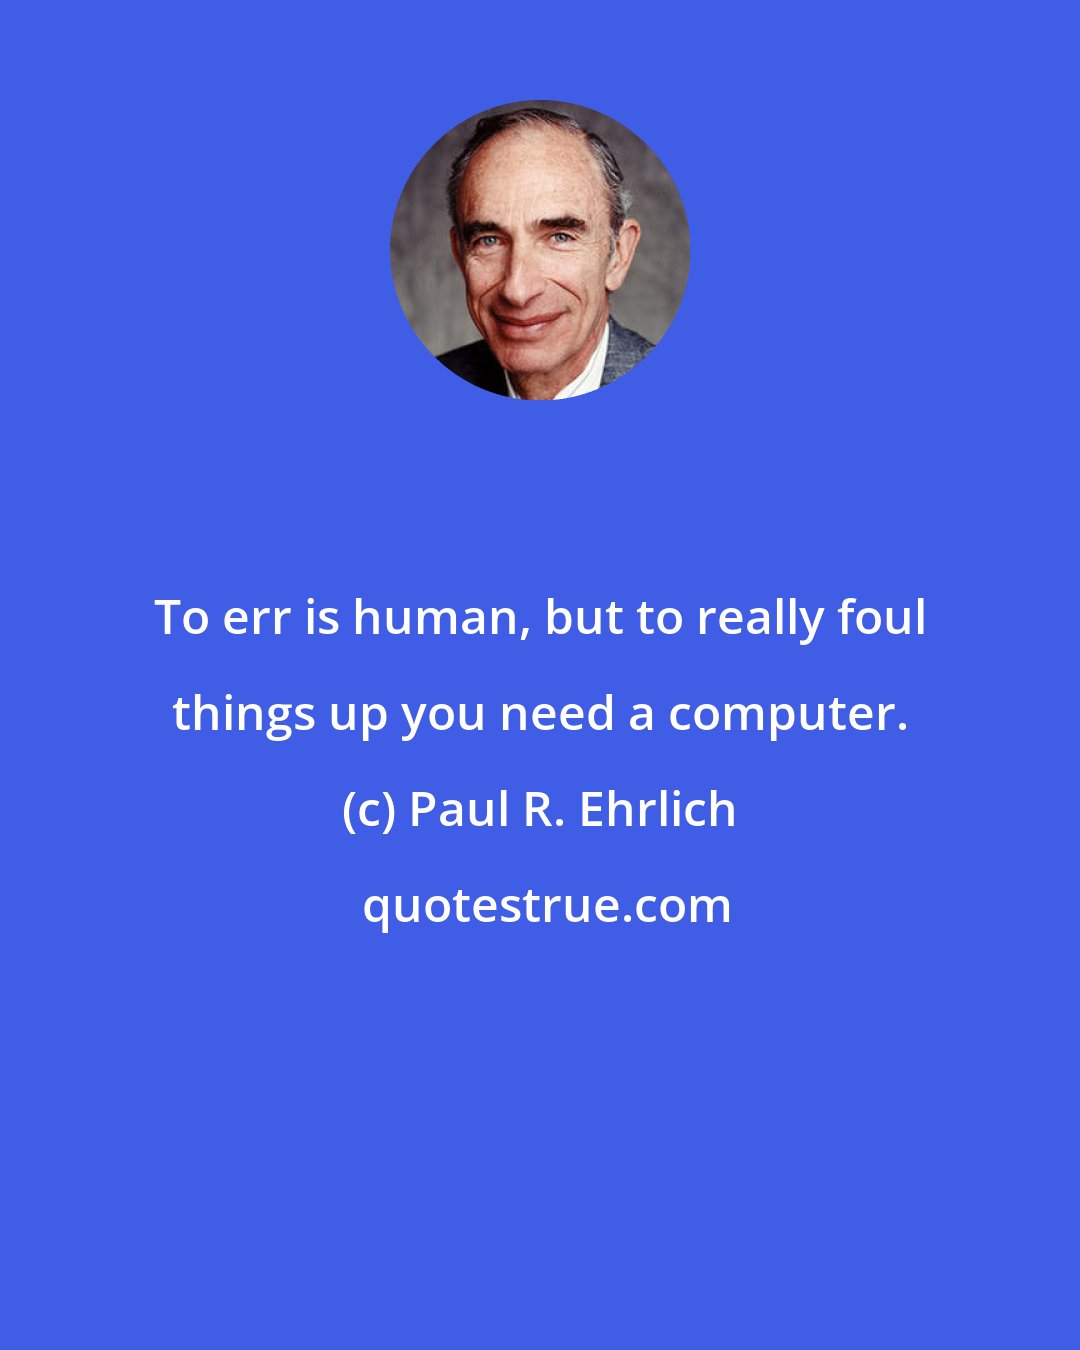 Paul R. Ehrlich: To err is human, but to really foul things up you need a computer.